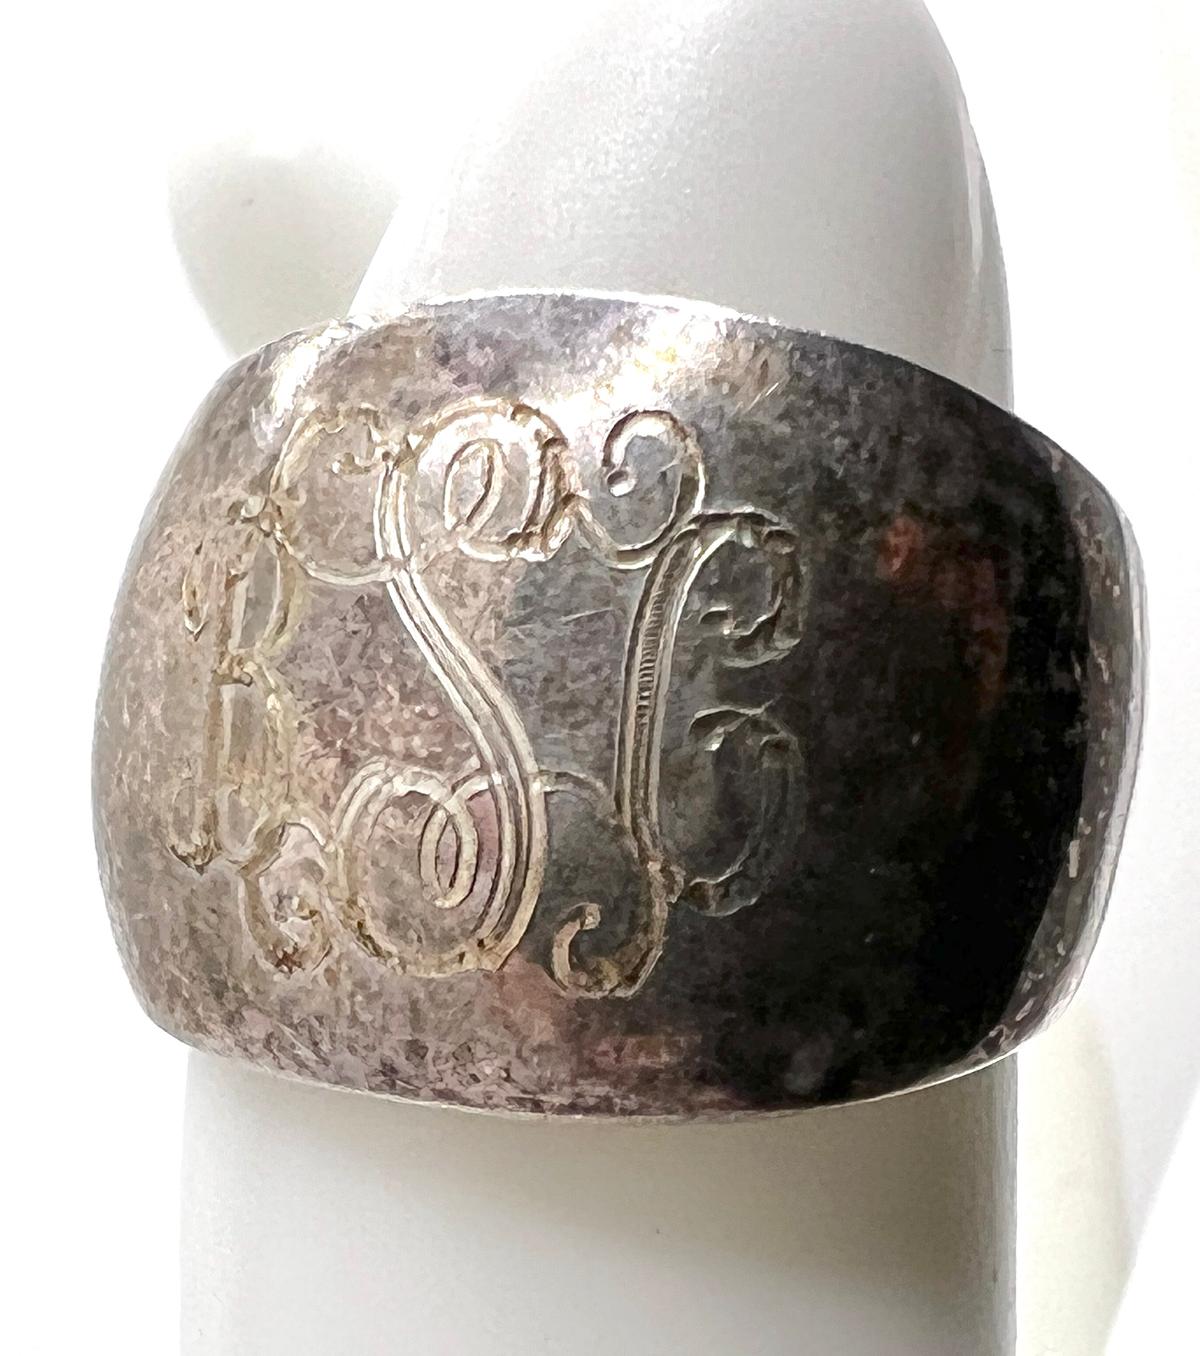 Sterling Silver Etched Ring